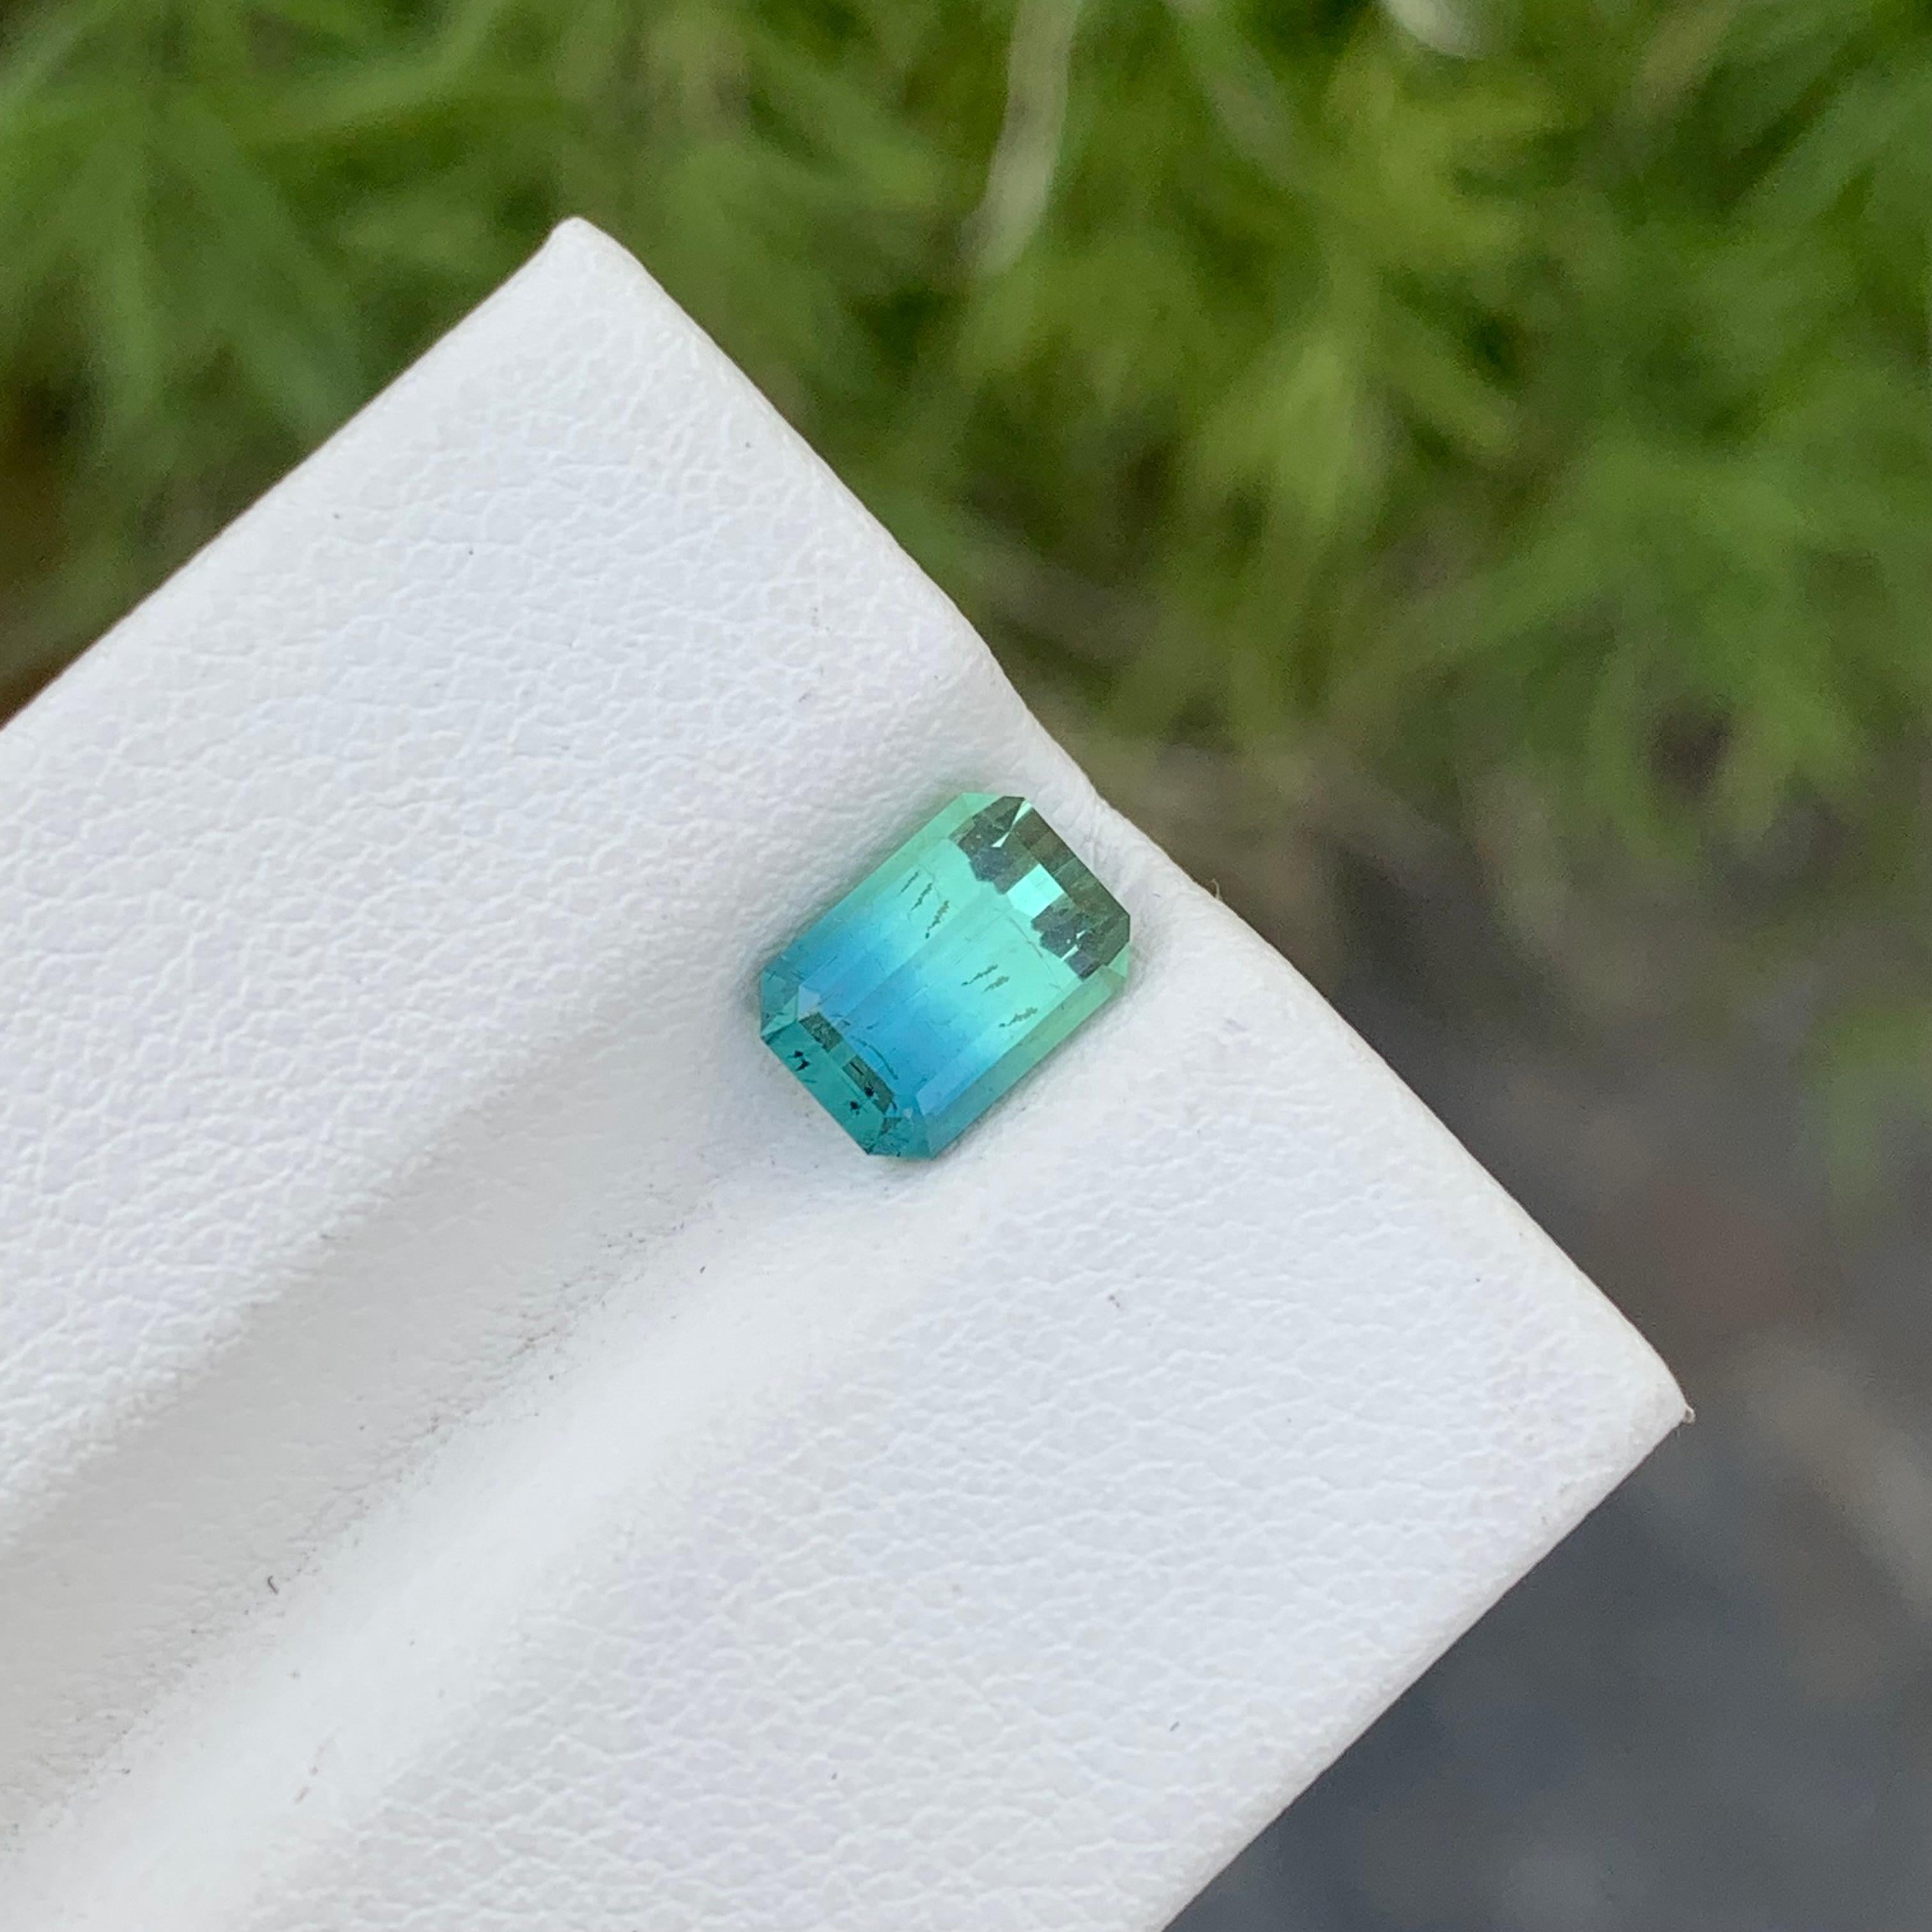 Loose Bi Colour Tourmaline
Weight: 2.35 Carats
Dimension: 8.3 x 6.1 x 5.5 Mm
Colour: Mint And Aqua Blue
Origin: Afghanistan
Certificate: On Demand
Treatment: Non

Tourmaline is a captivating gemstone known for its remarkable variety of colors,